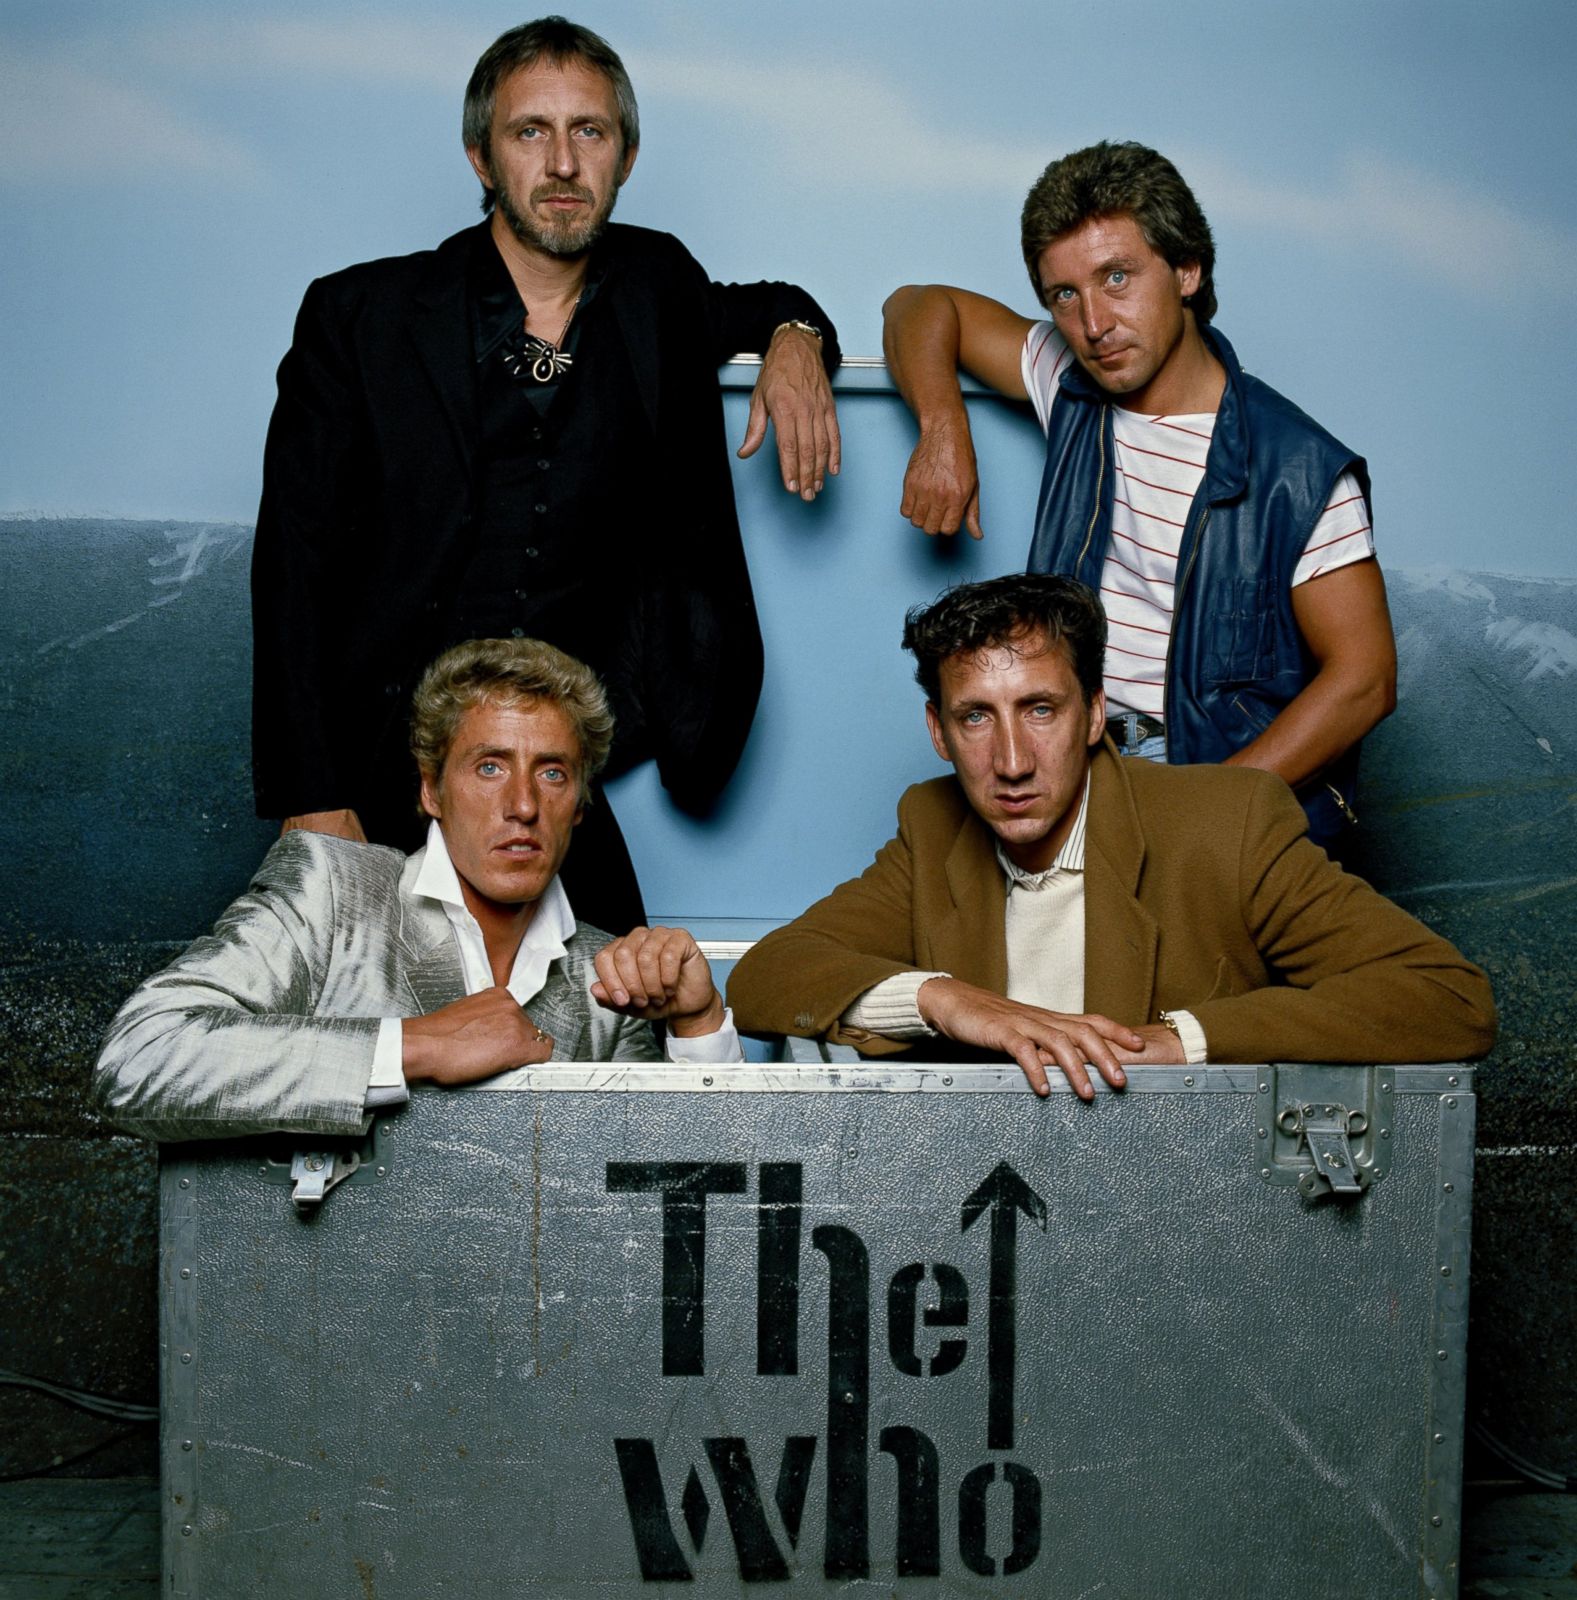 The who collection the who. Группа the who. The who фото группы. Группа w. Группа the who 1982.